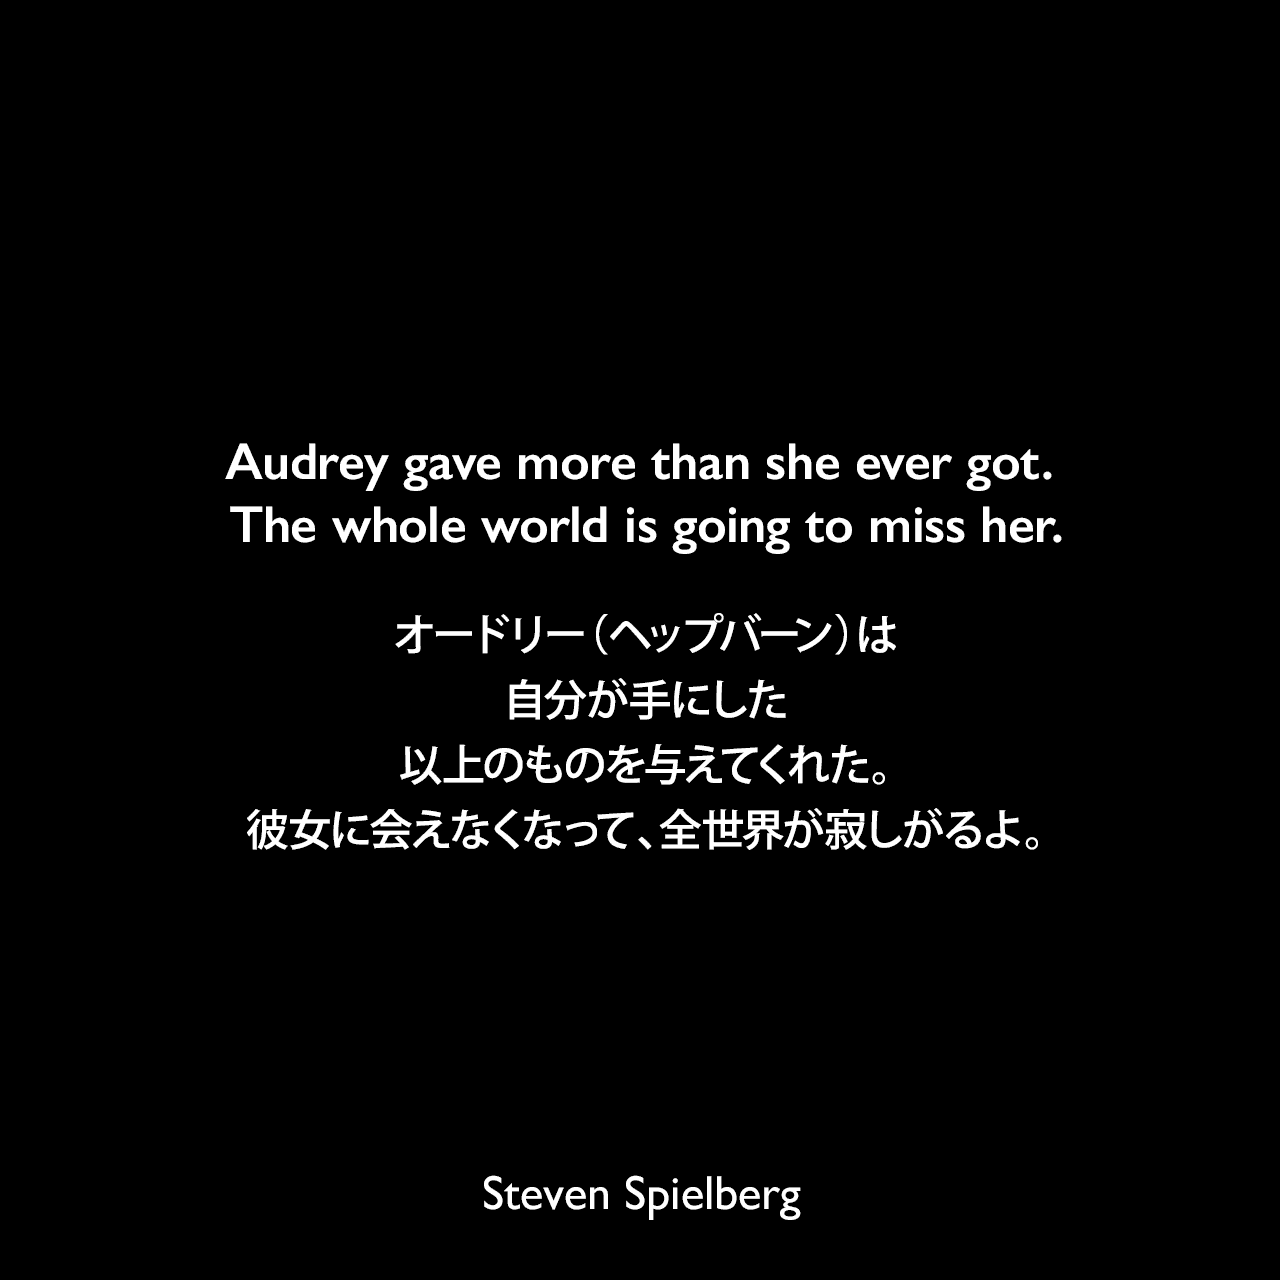 Audrey gave more than she ever got. The whole world is going to miss her.オードリー（ヘップバーン）は自分が手にした以上のものを与えてくれた。彼女に会えなくなって、全世界が寂しがるよ。Steven Spielberg